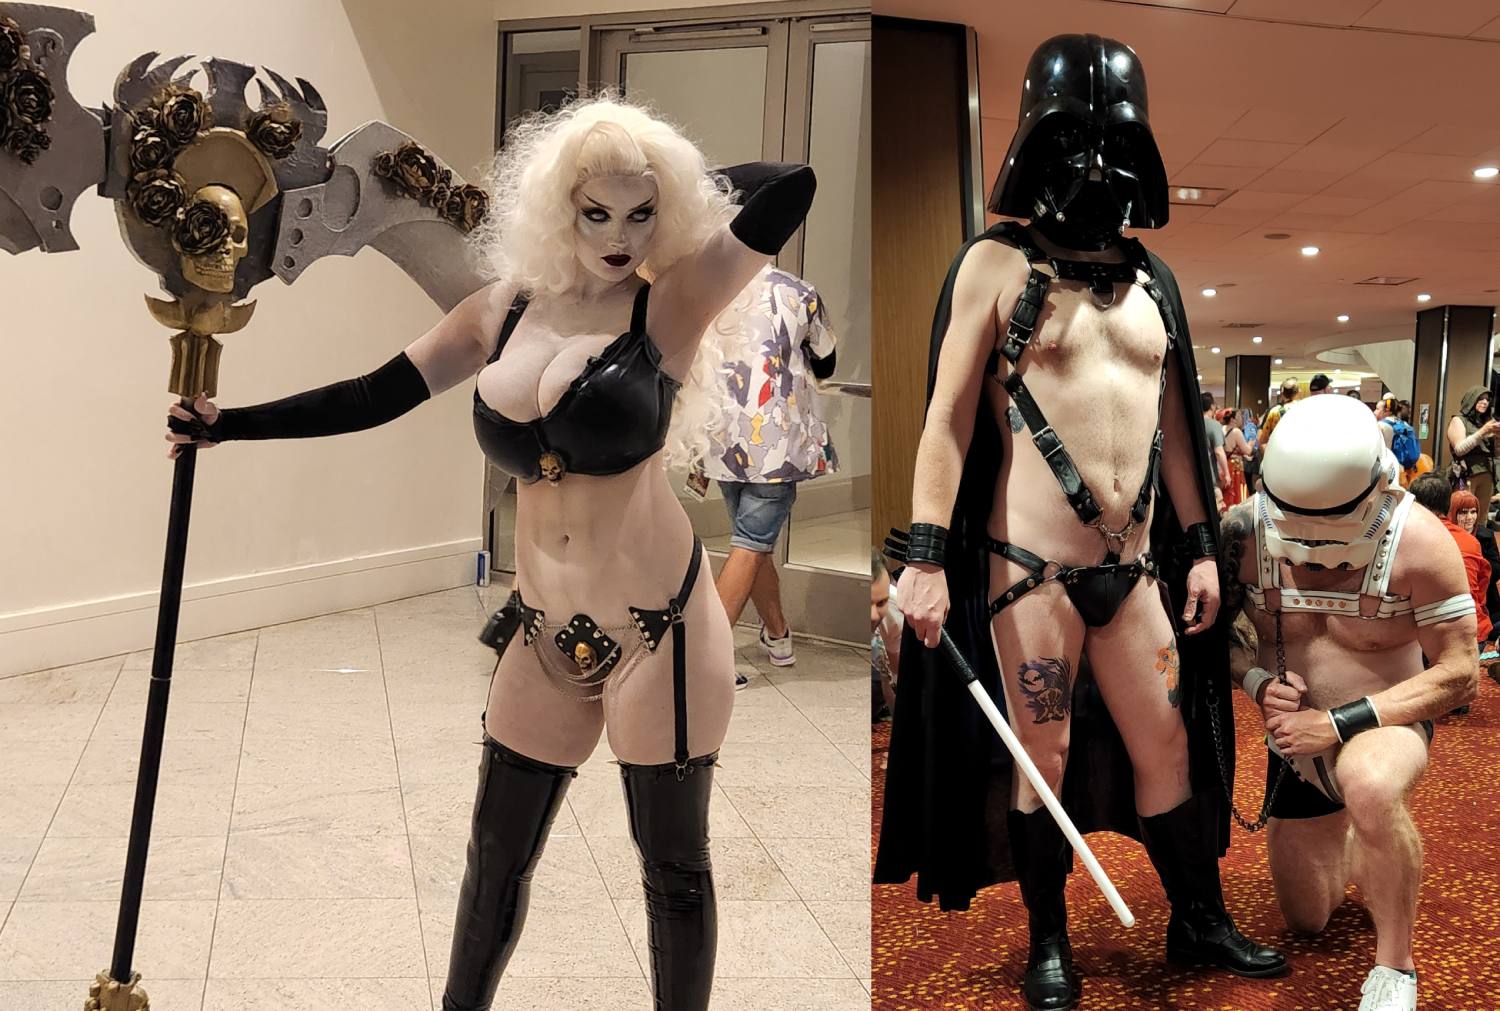 Nerd Girl Slutty Cosplay Porn - Nerdy & Dirty: The Sexual Escapades of Comic Book Conventions -  Philadelphia Weekly